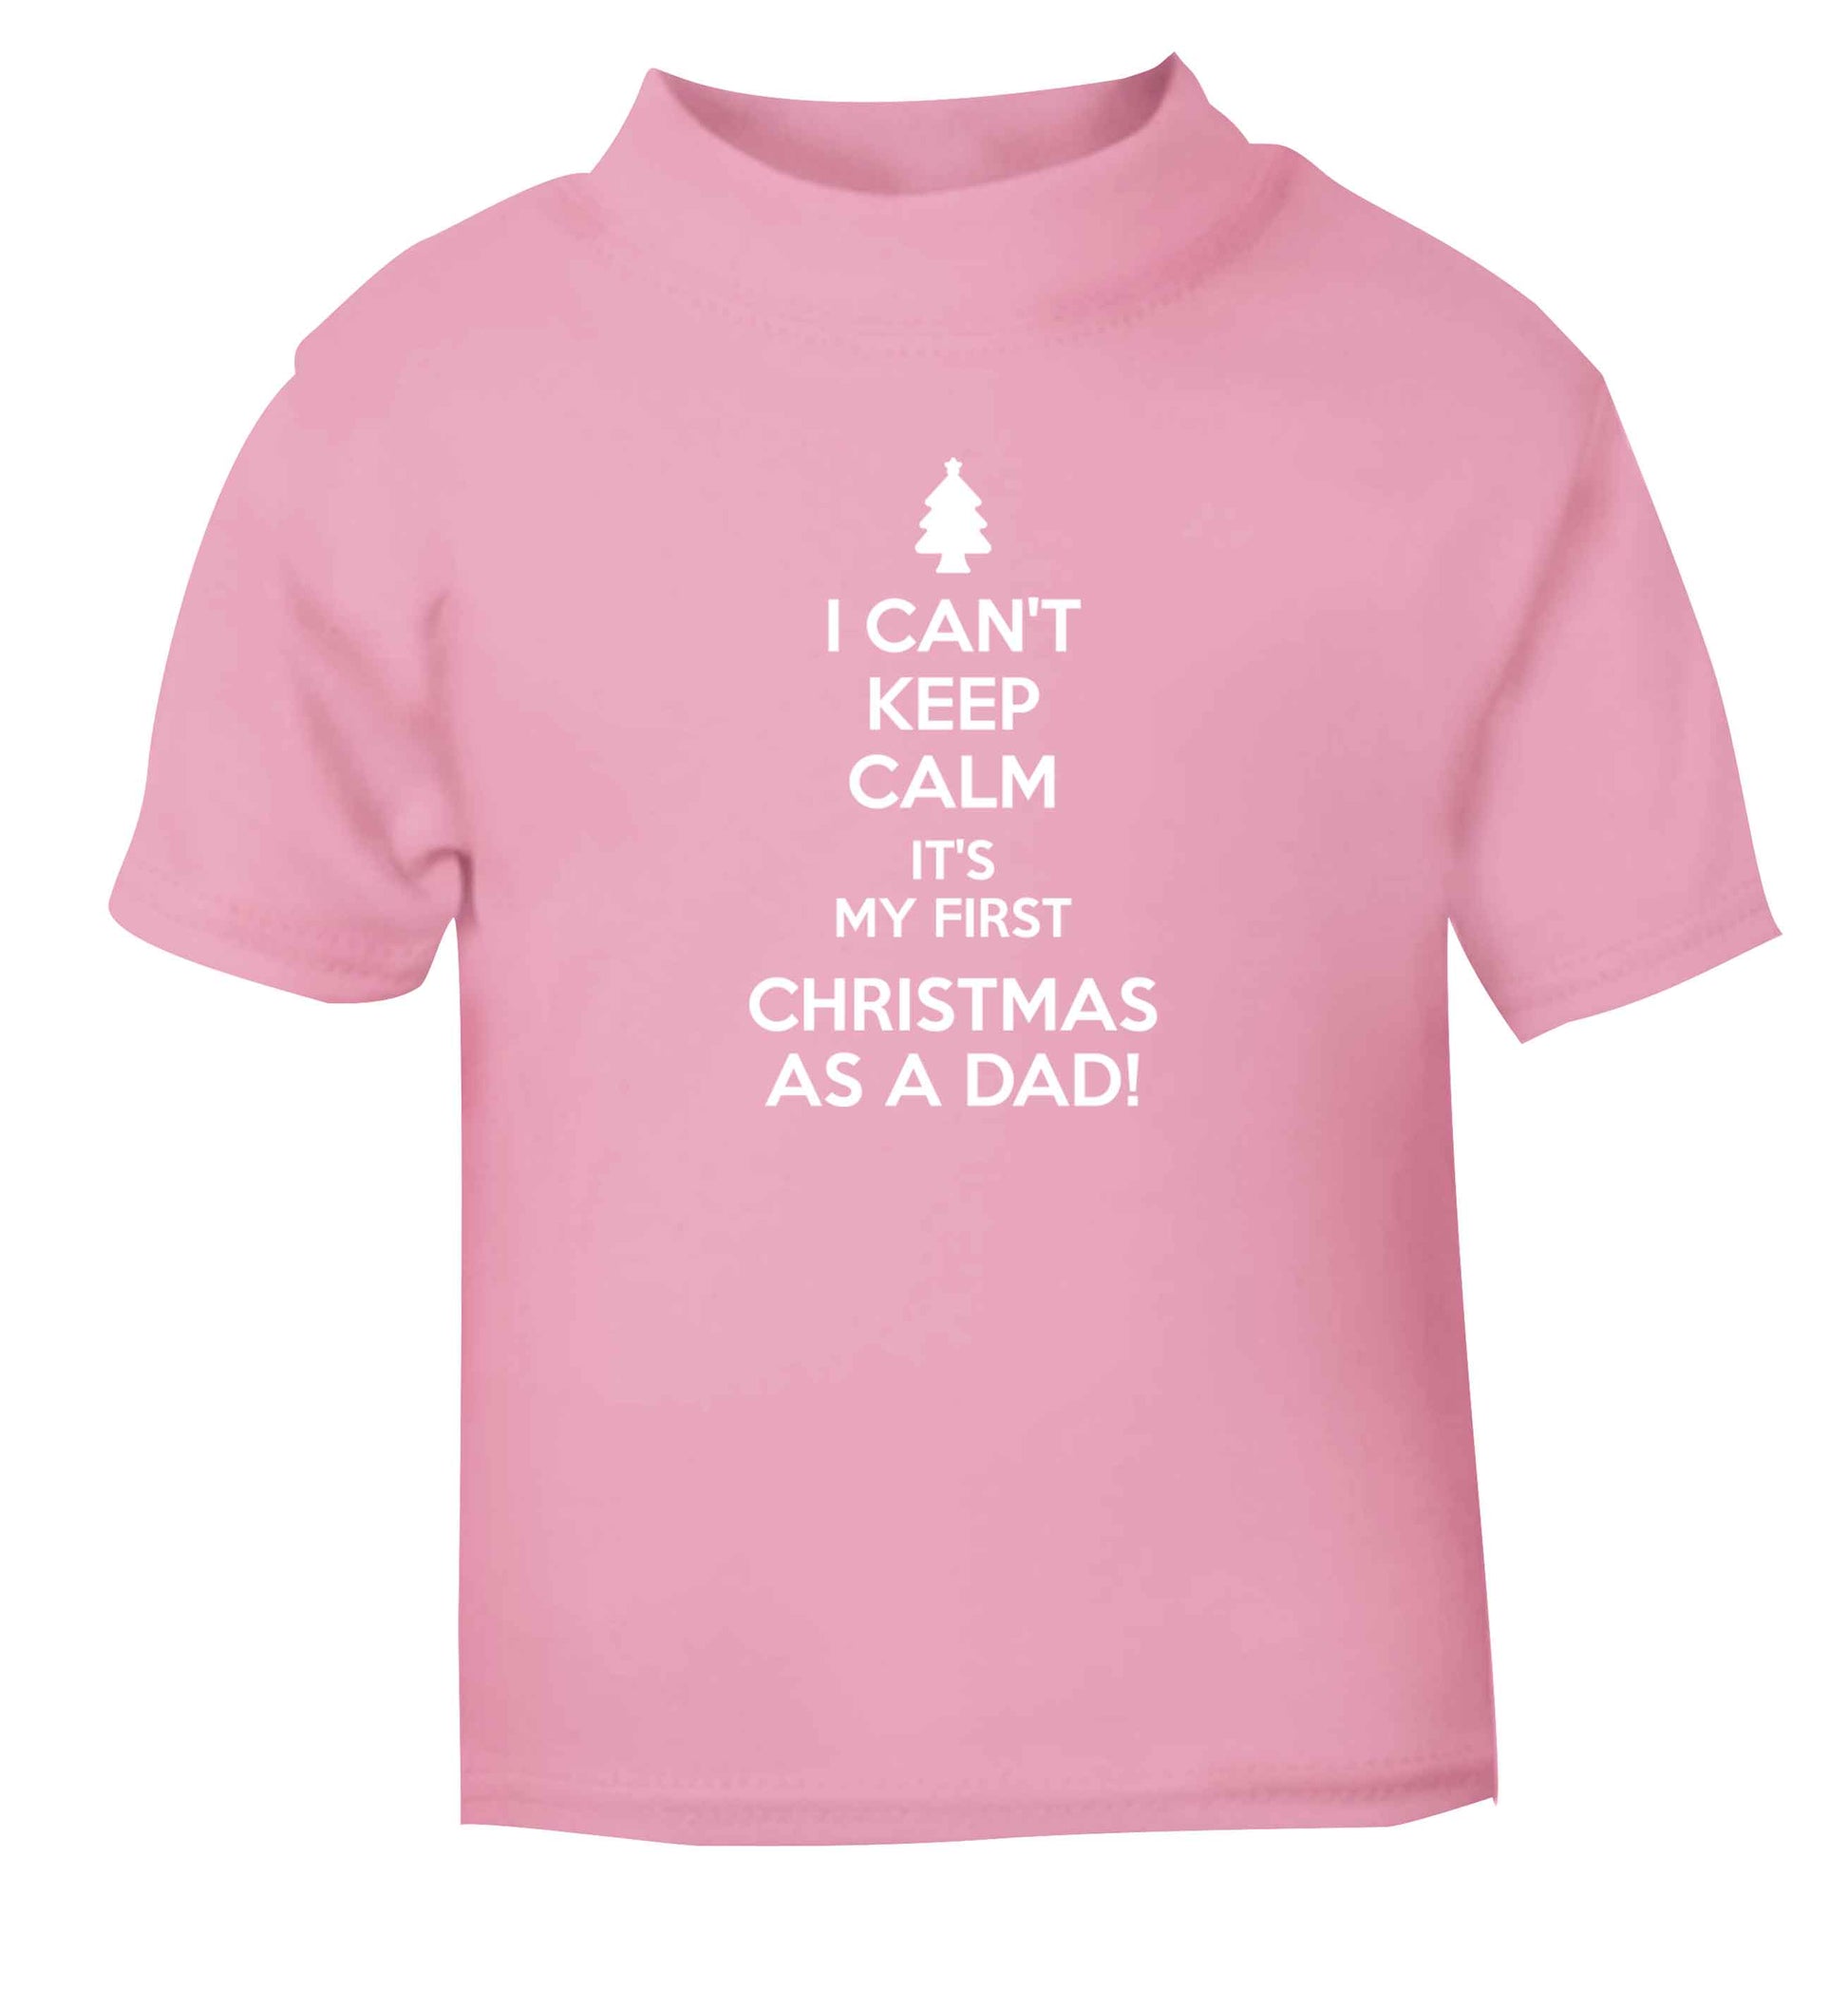 I can't keep calm it's my first Christmas as a dad light pink Baby Toddler Tshirt 2 Years